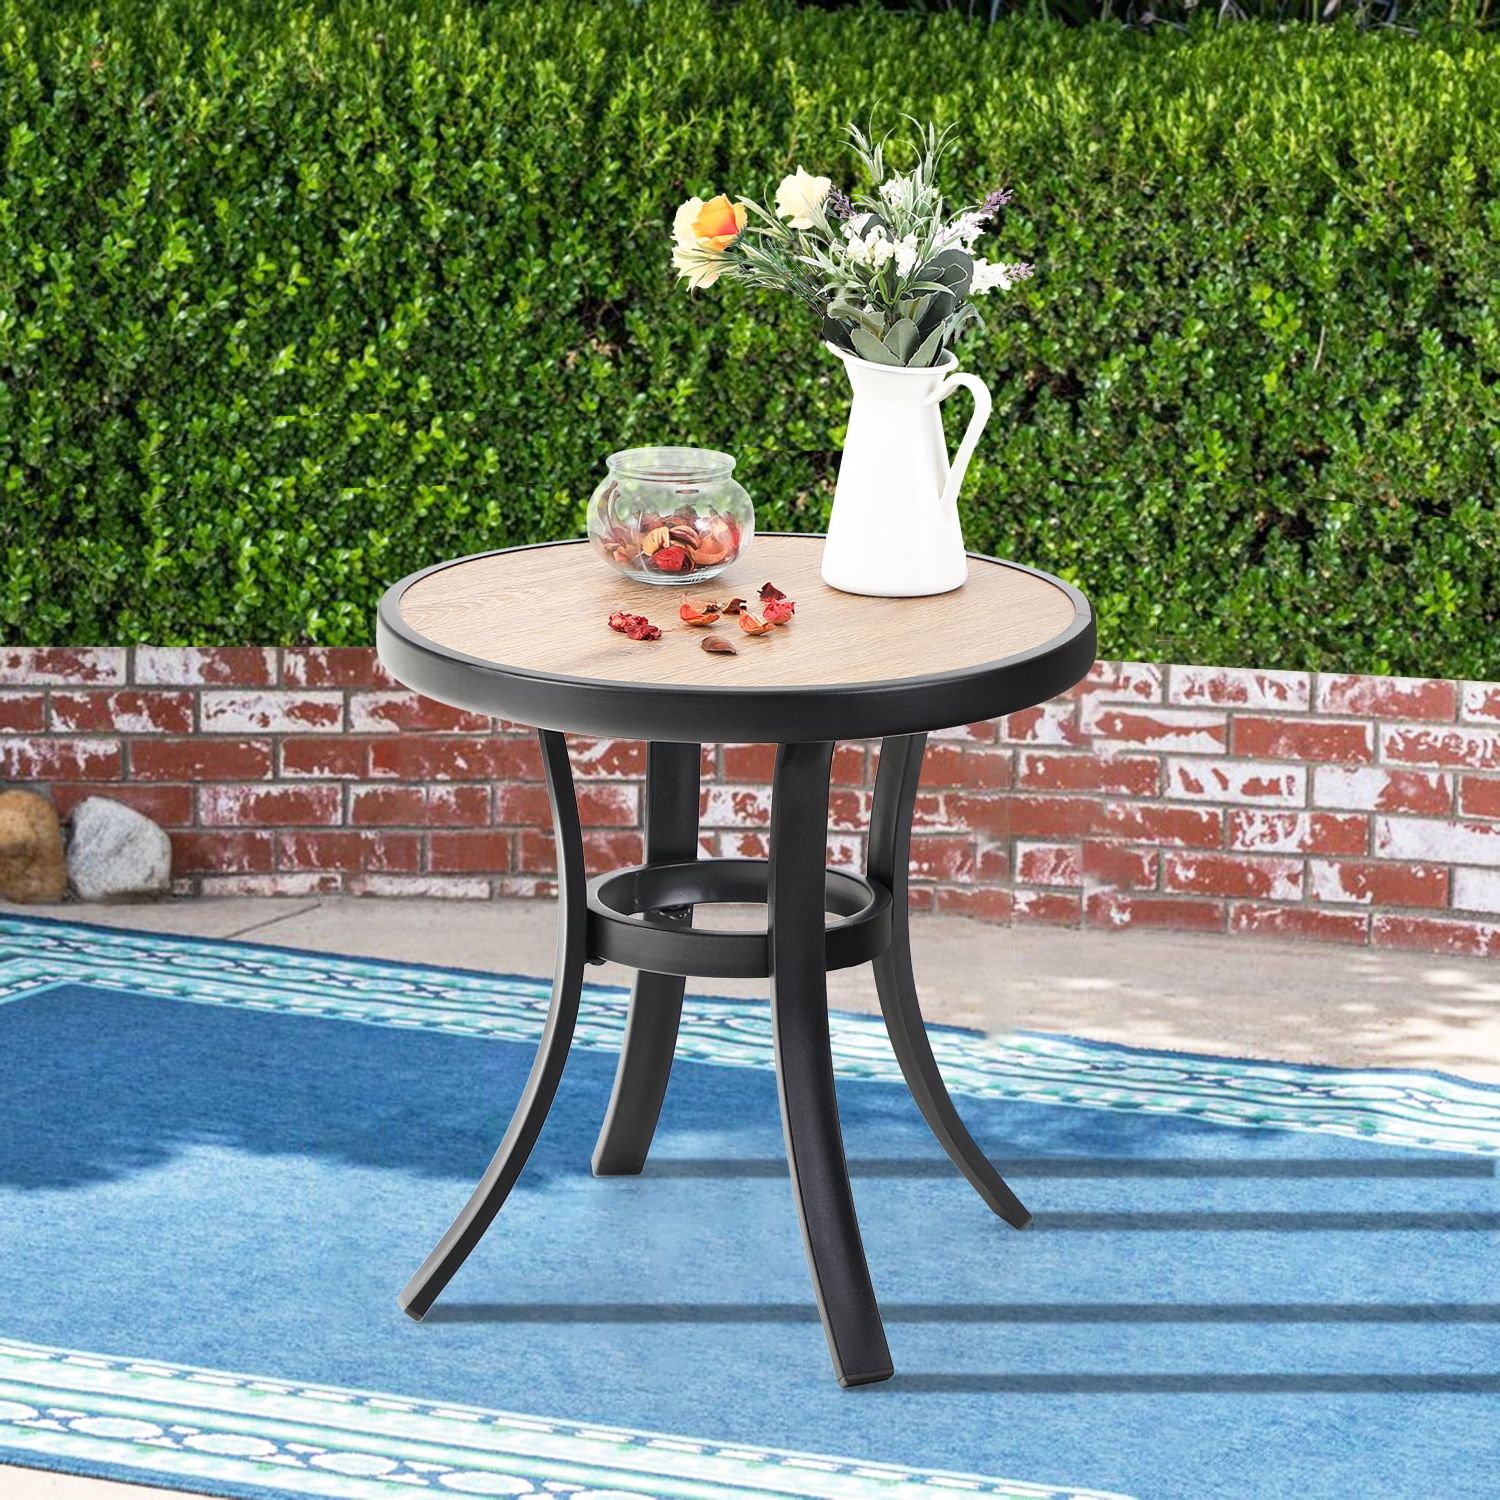 Mf Studio 19 Inches Bistro Side Table, Outdoor Coffee Table Wooden Like With Regard To Modern Outdoor Patio Coffee Tables (View 10 of 20)